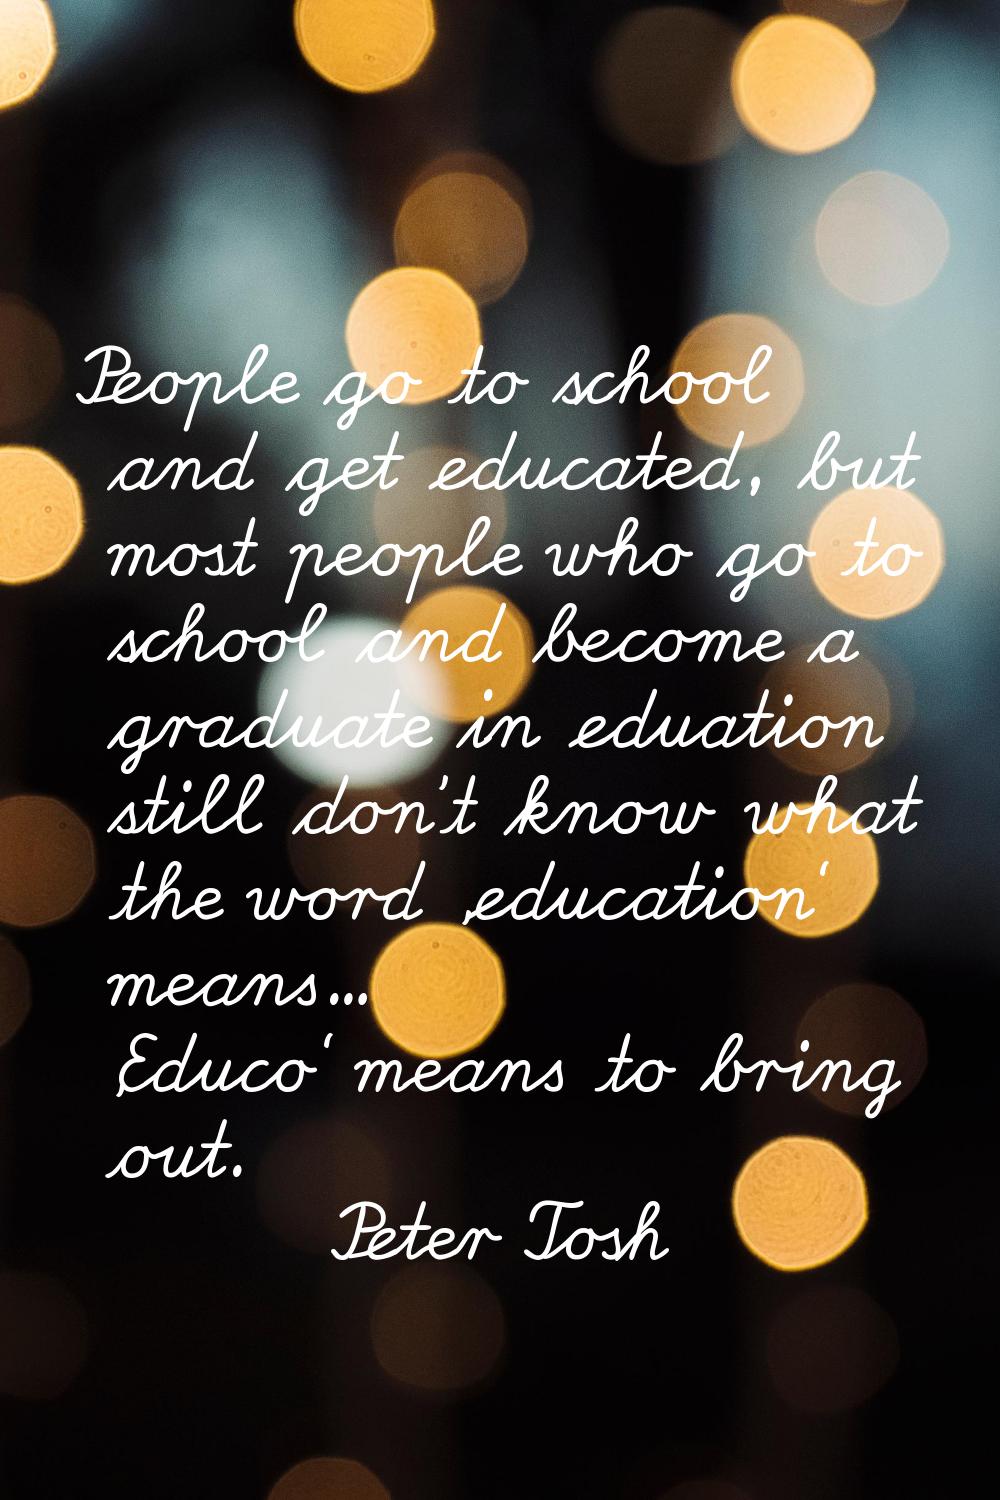 People go to school and get educated, but most people who go to school and become a graduate in edu